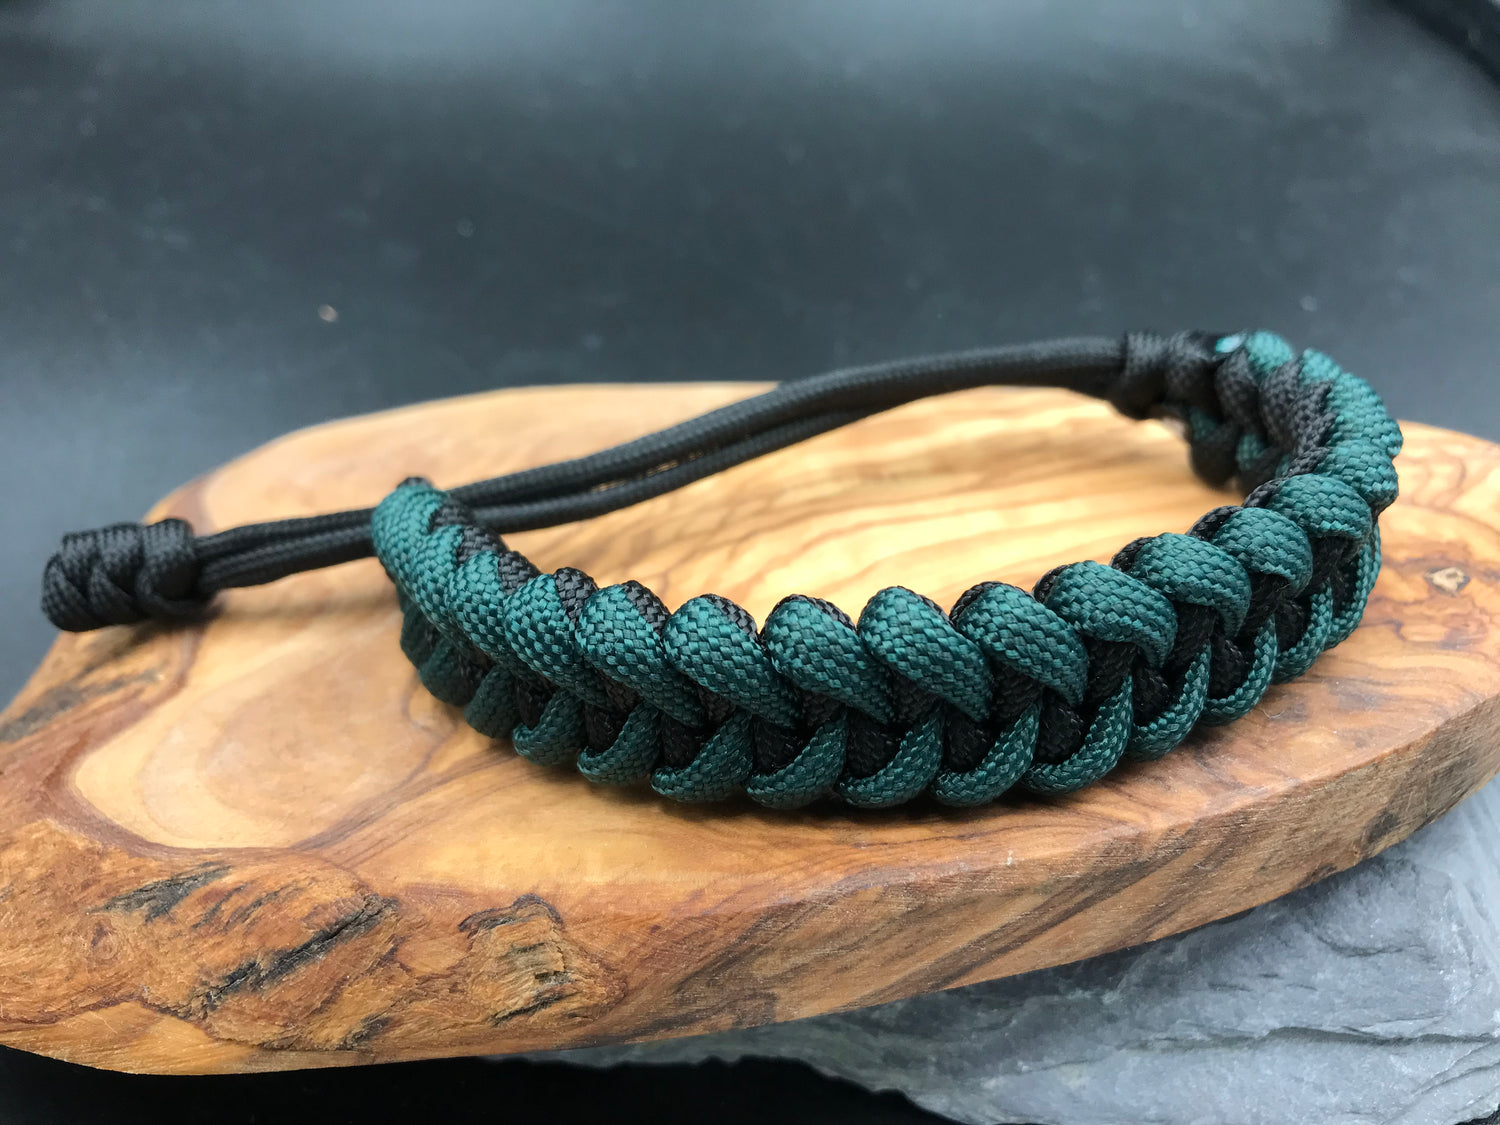 Our Hand made Paracord bracelets